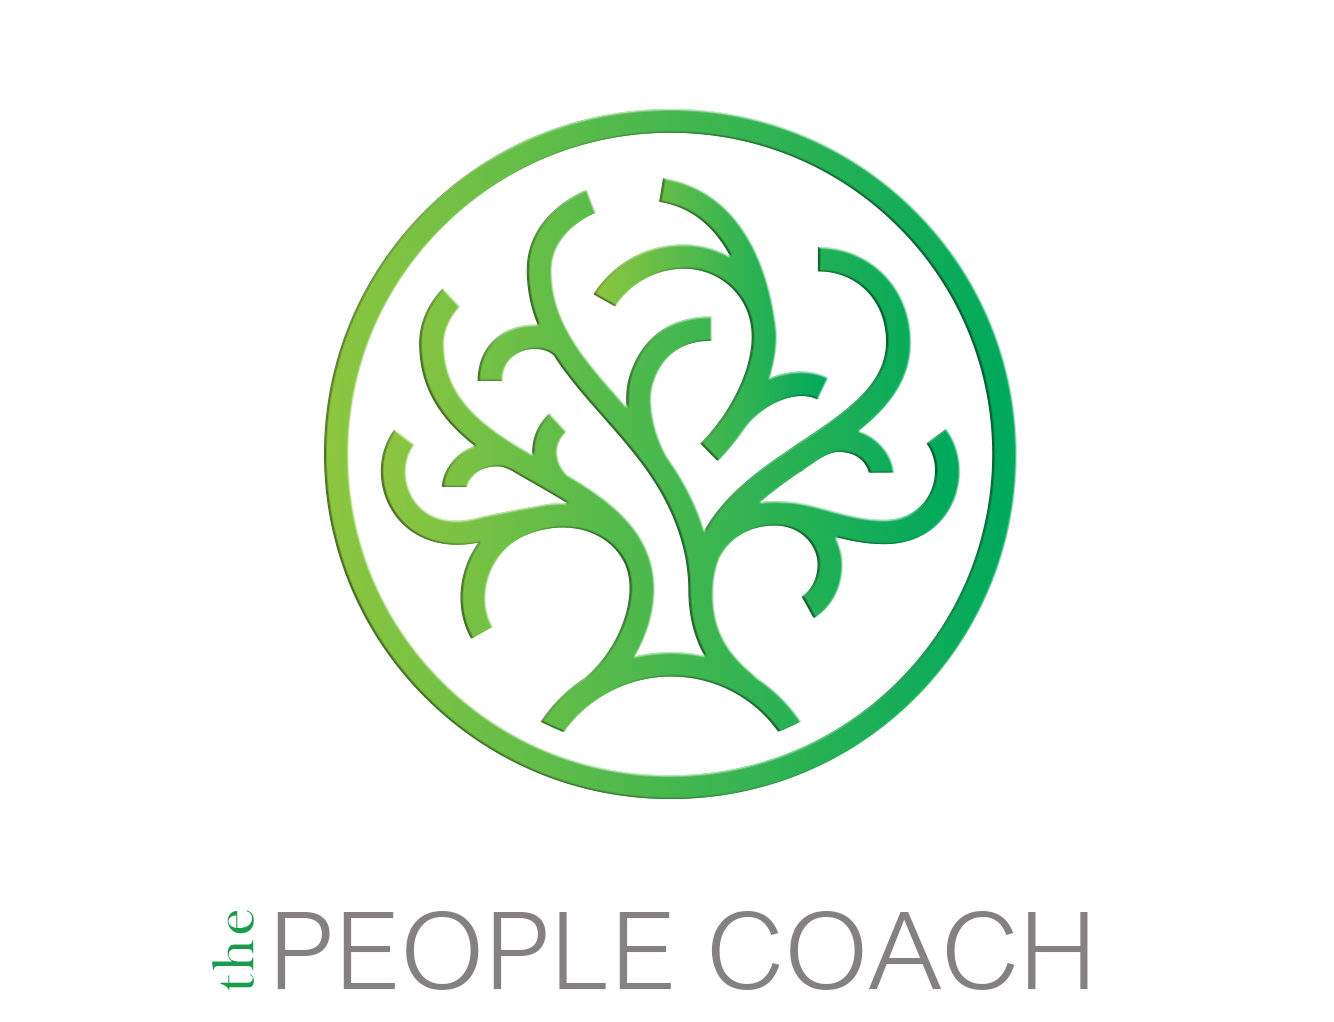 The People Coach